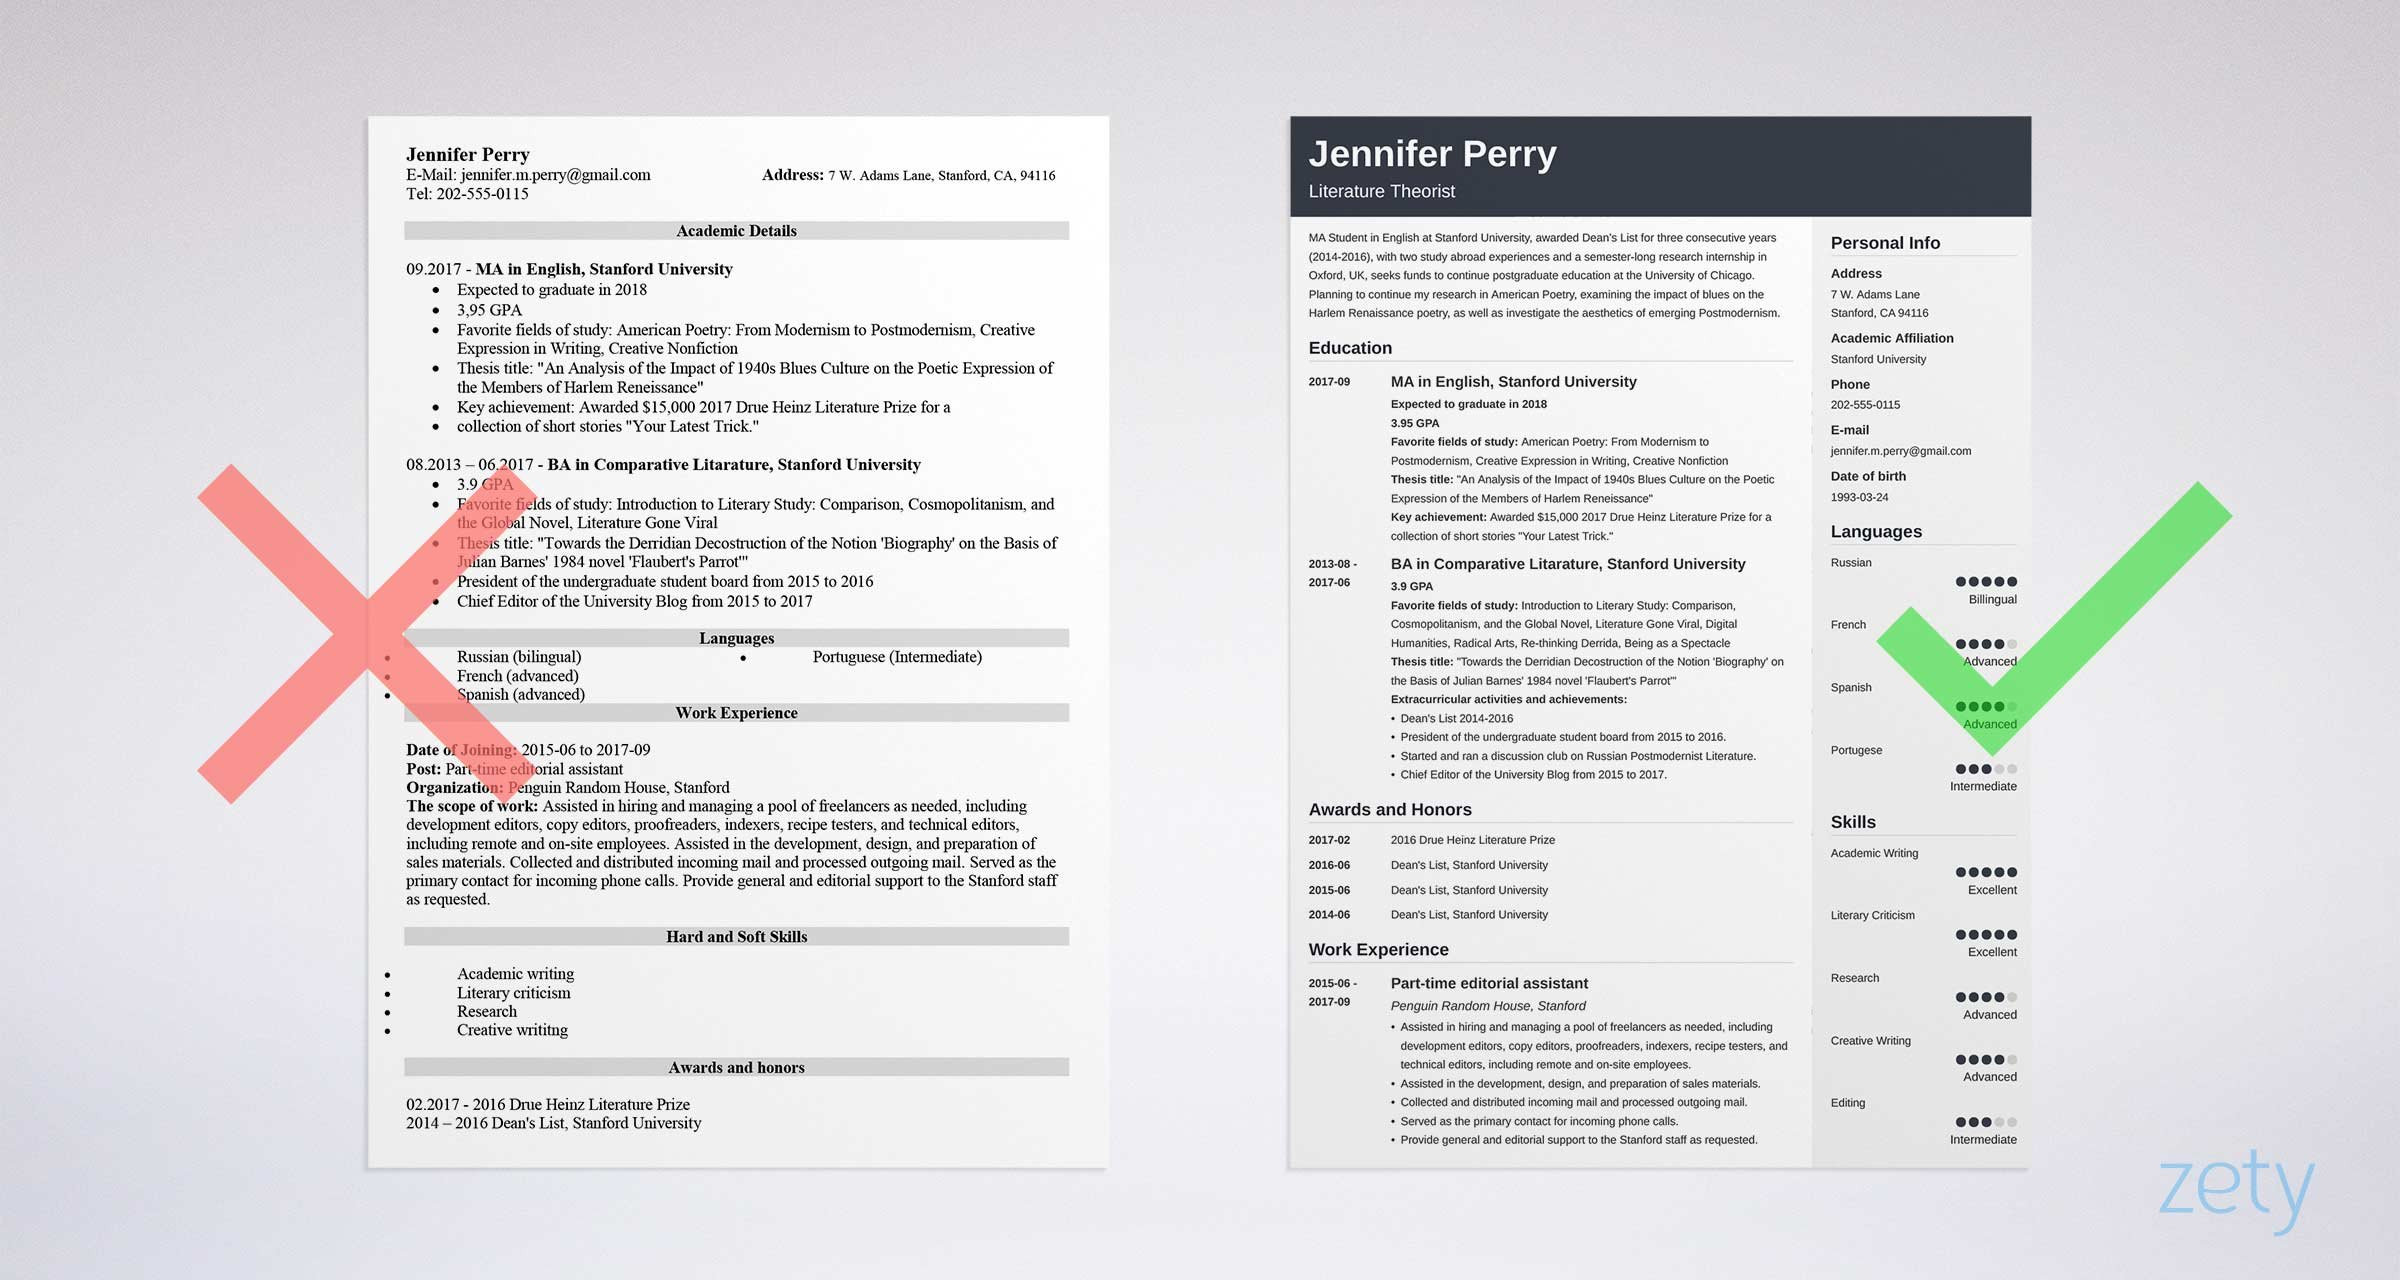 Sample Student Resume for Scholarship Application Examples 1 Page Scholarship Resume Examples [lancarrezekiqtemplate with Objective]